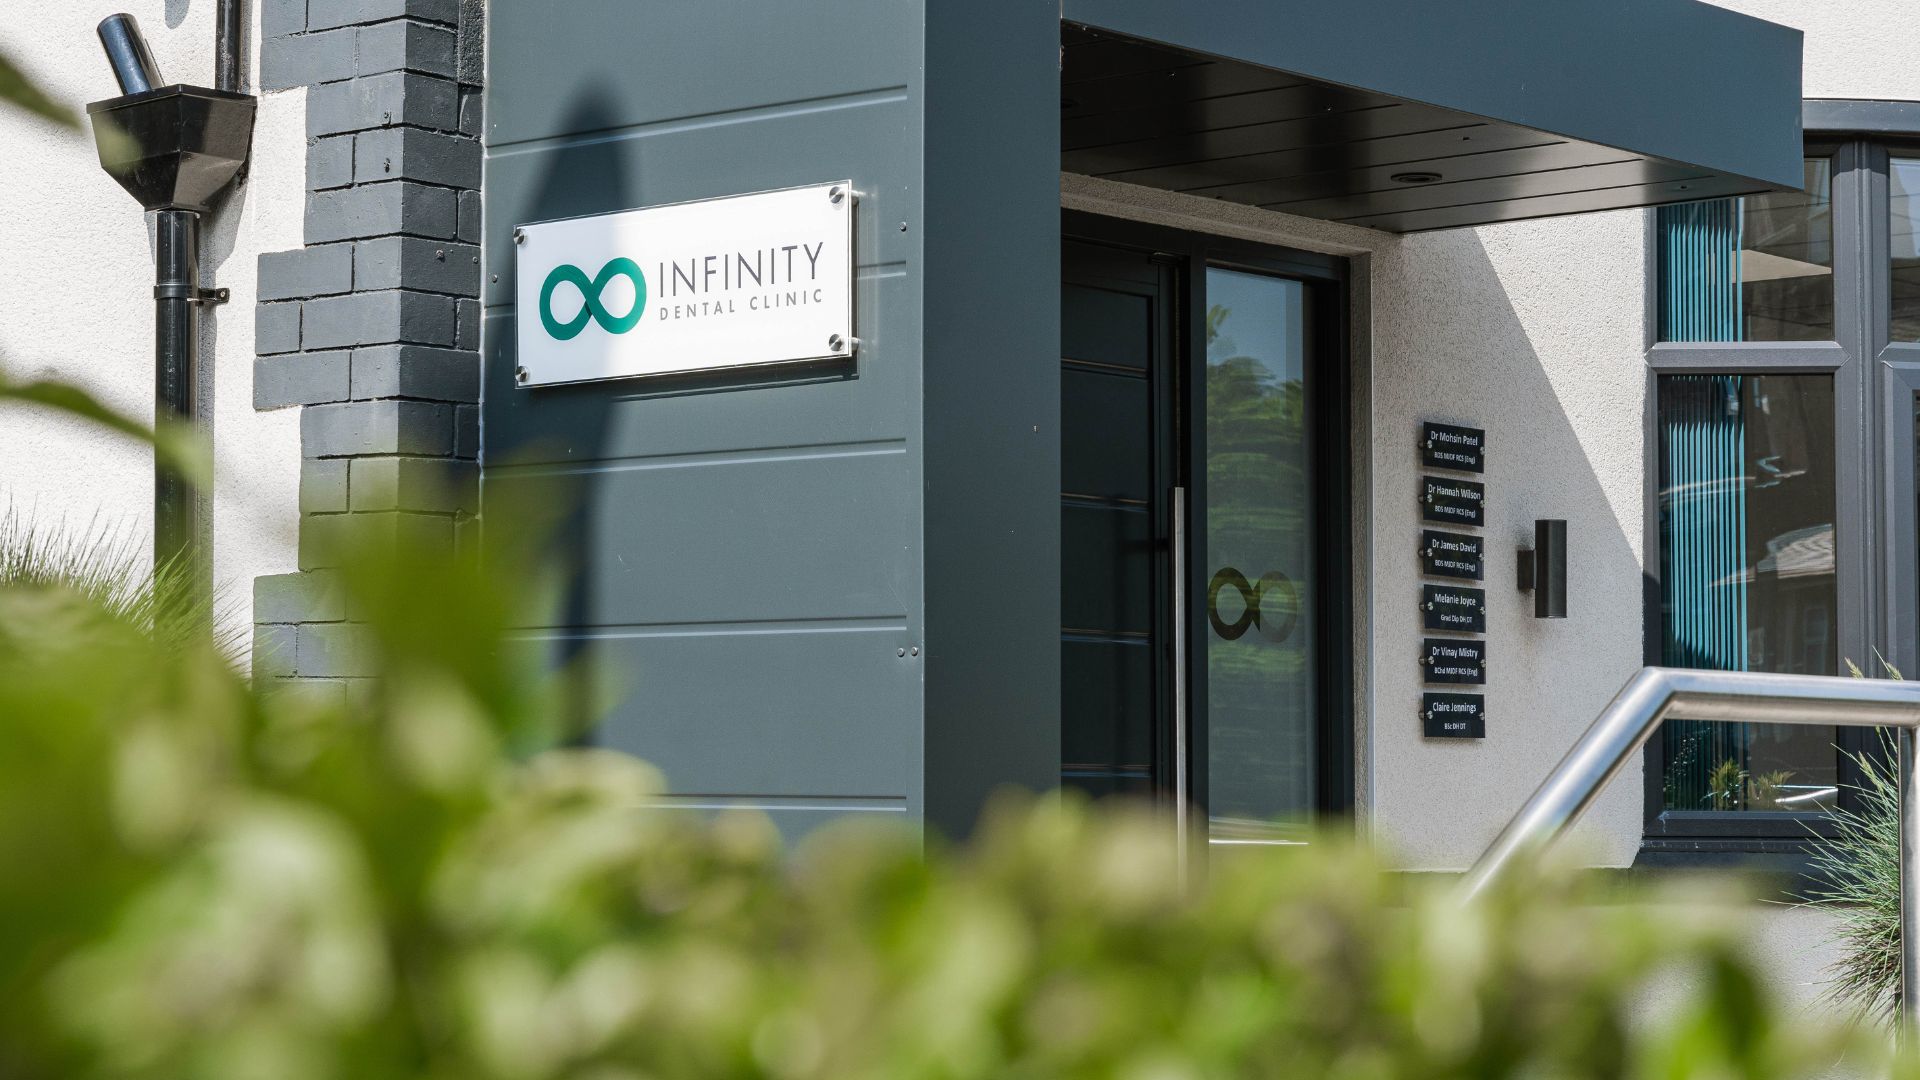 The entrance to the Infinity dental and skin clinic